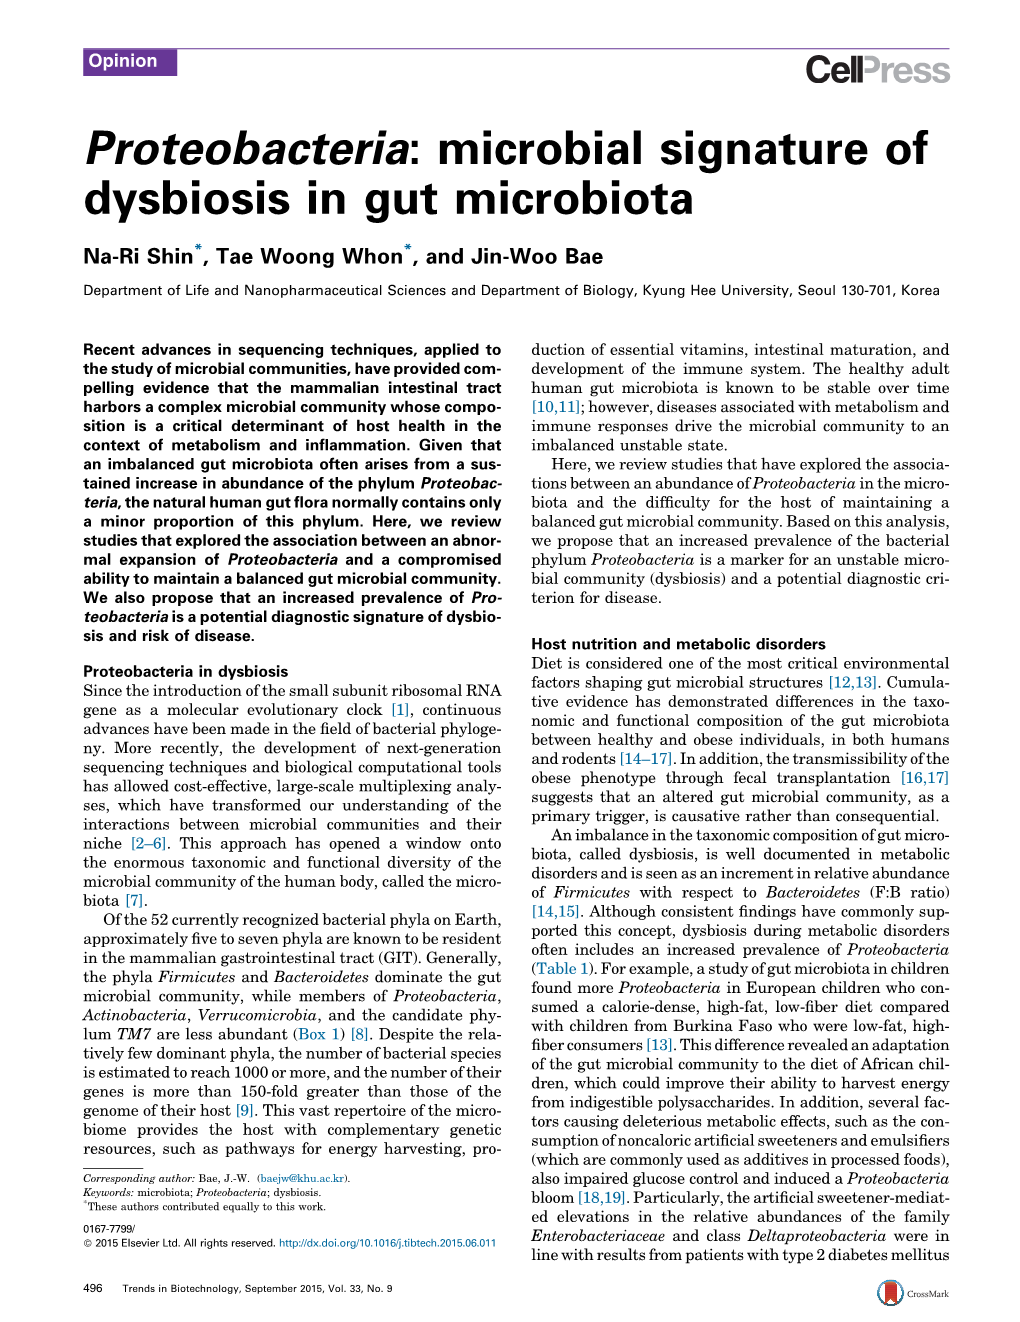 Proteobacteria: Microbial Signature of Dysbiosis in Gut Microbiota